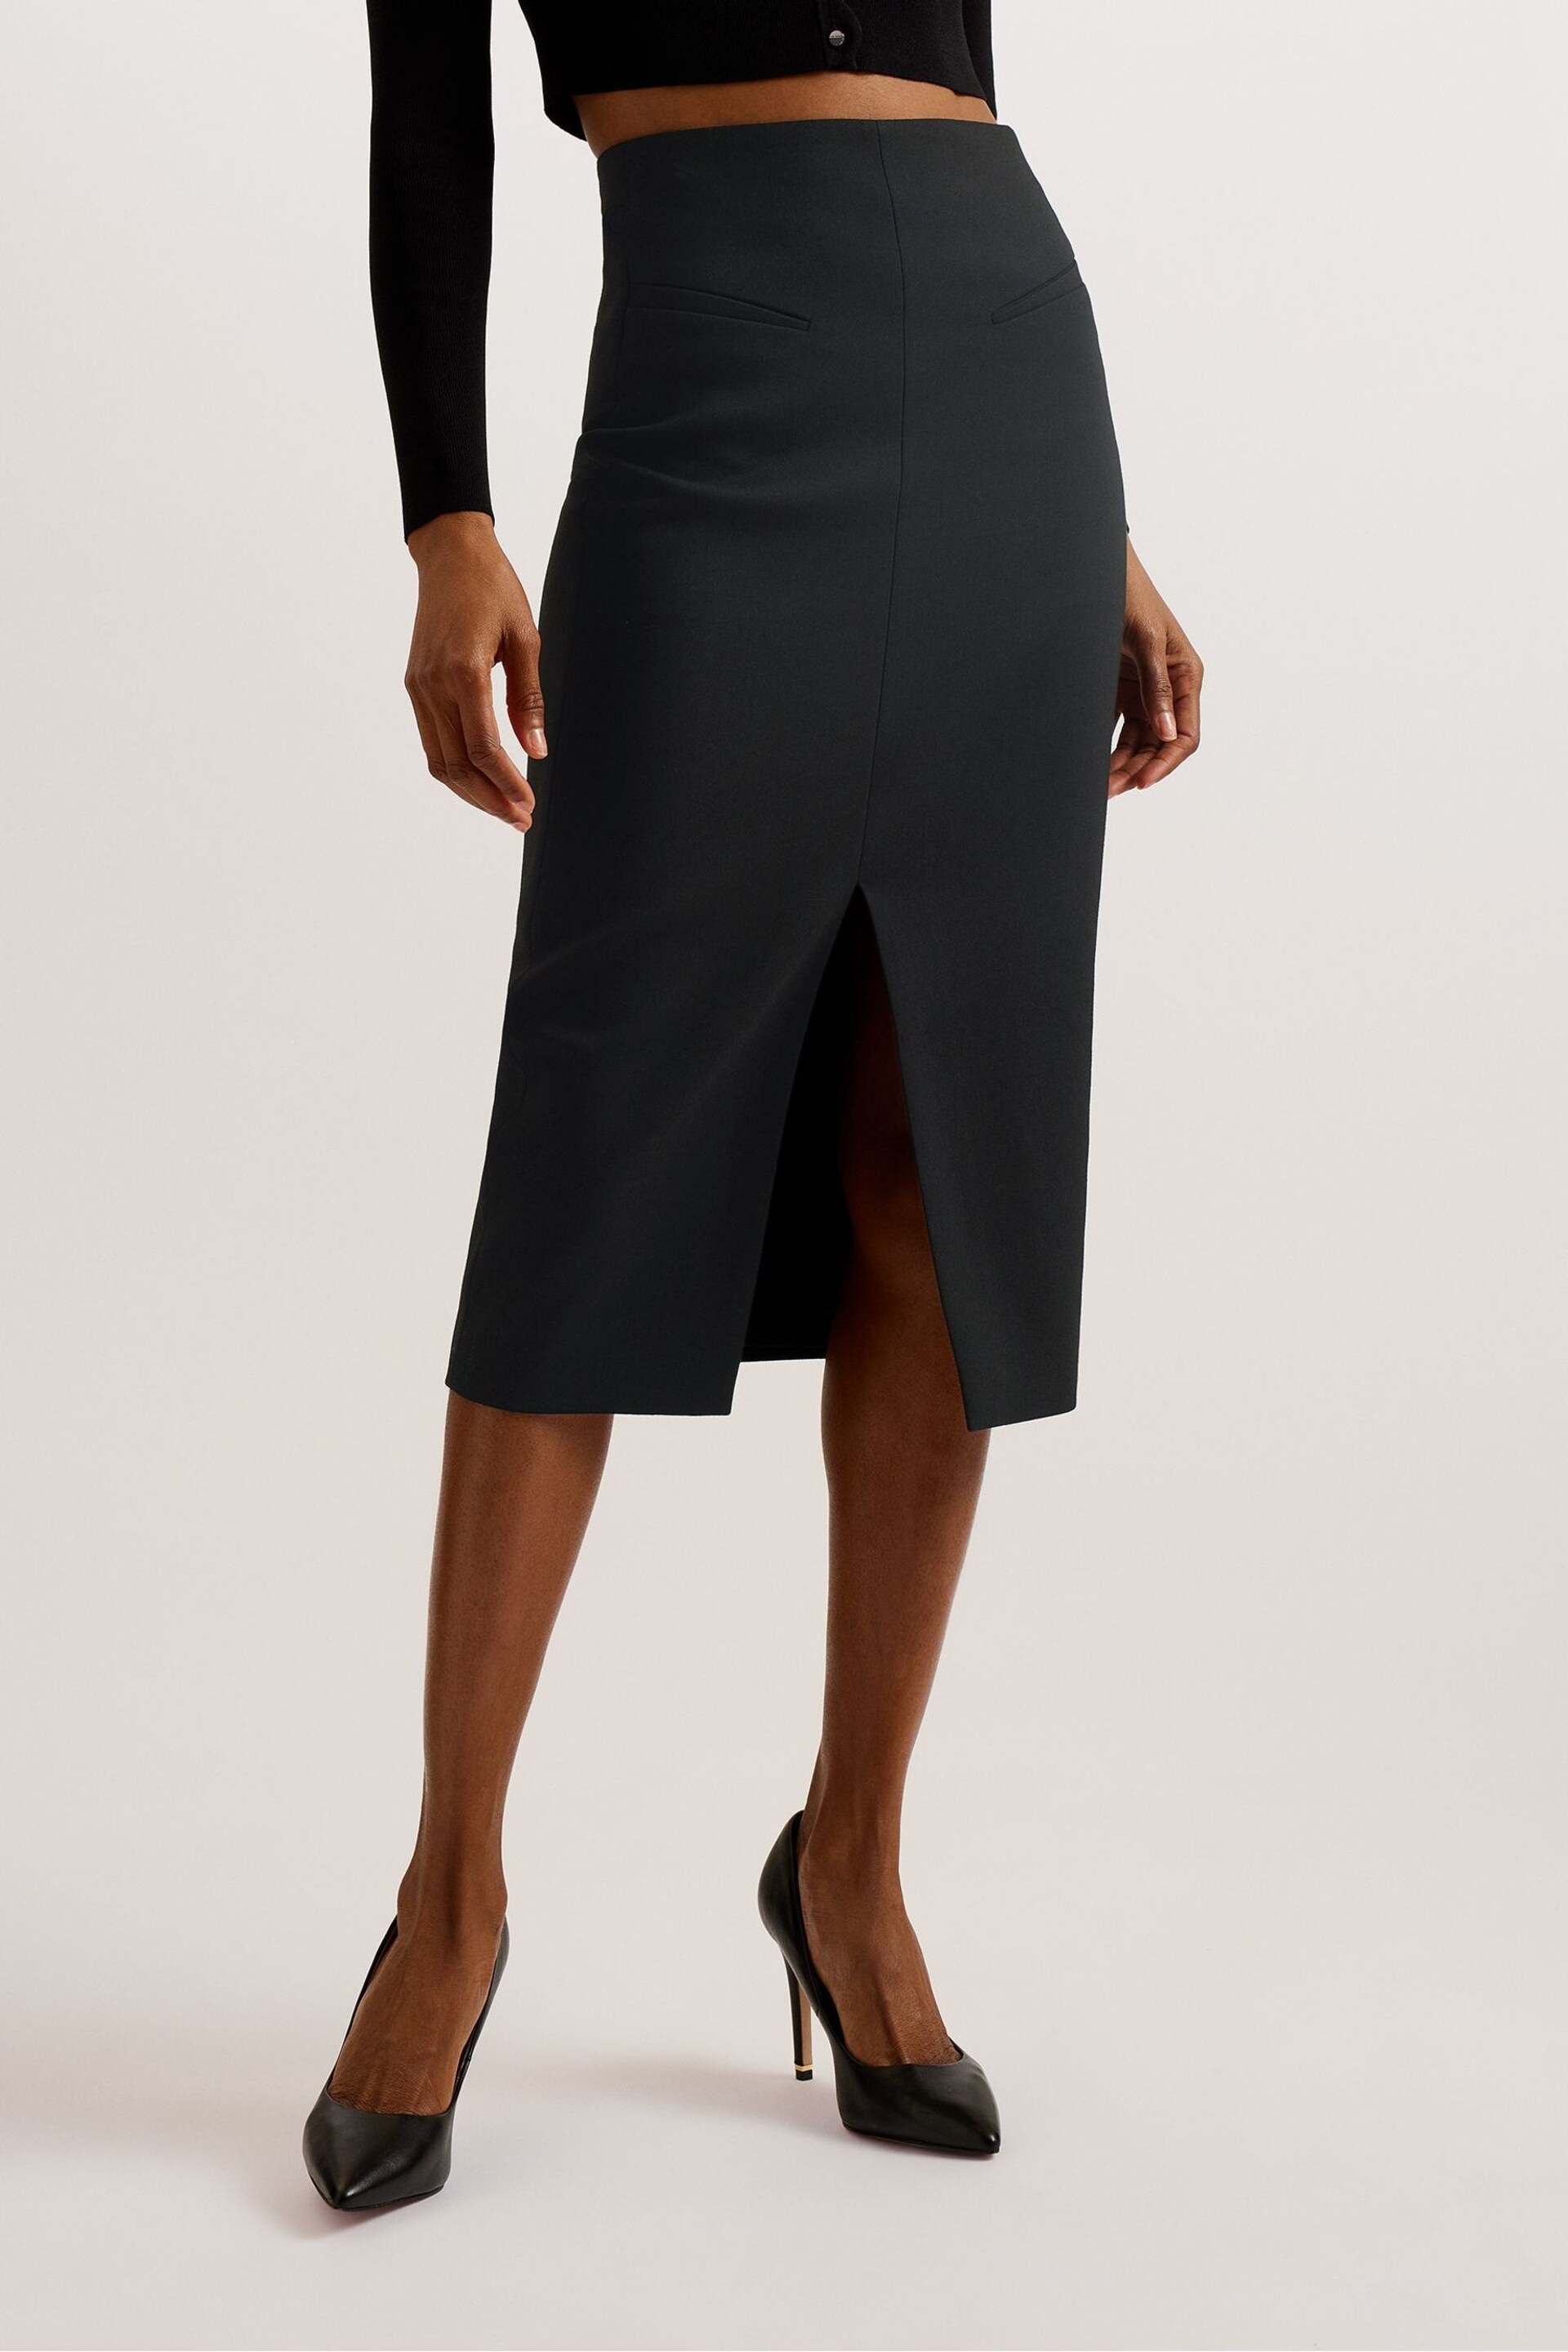 Ted Baker Black Manabus Tailored Midi Skirt With Front Split - Image 2 of 5